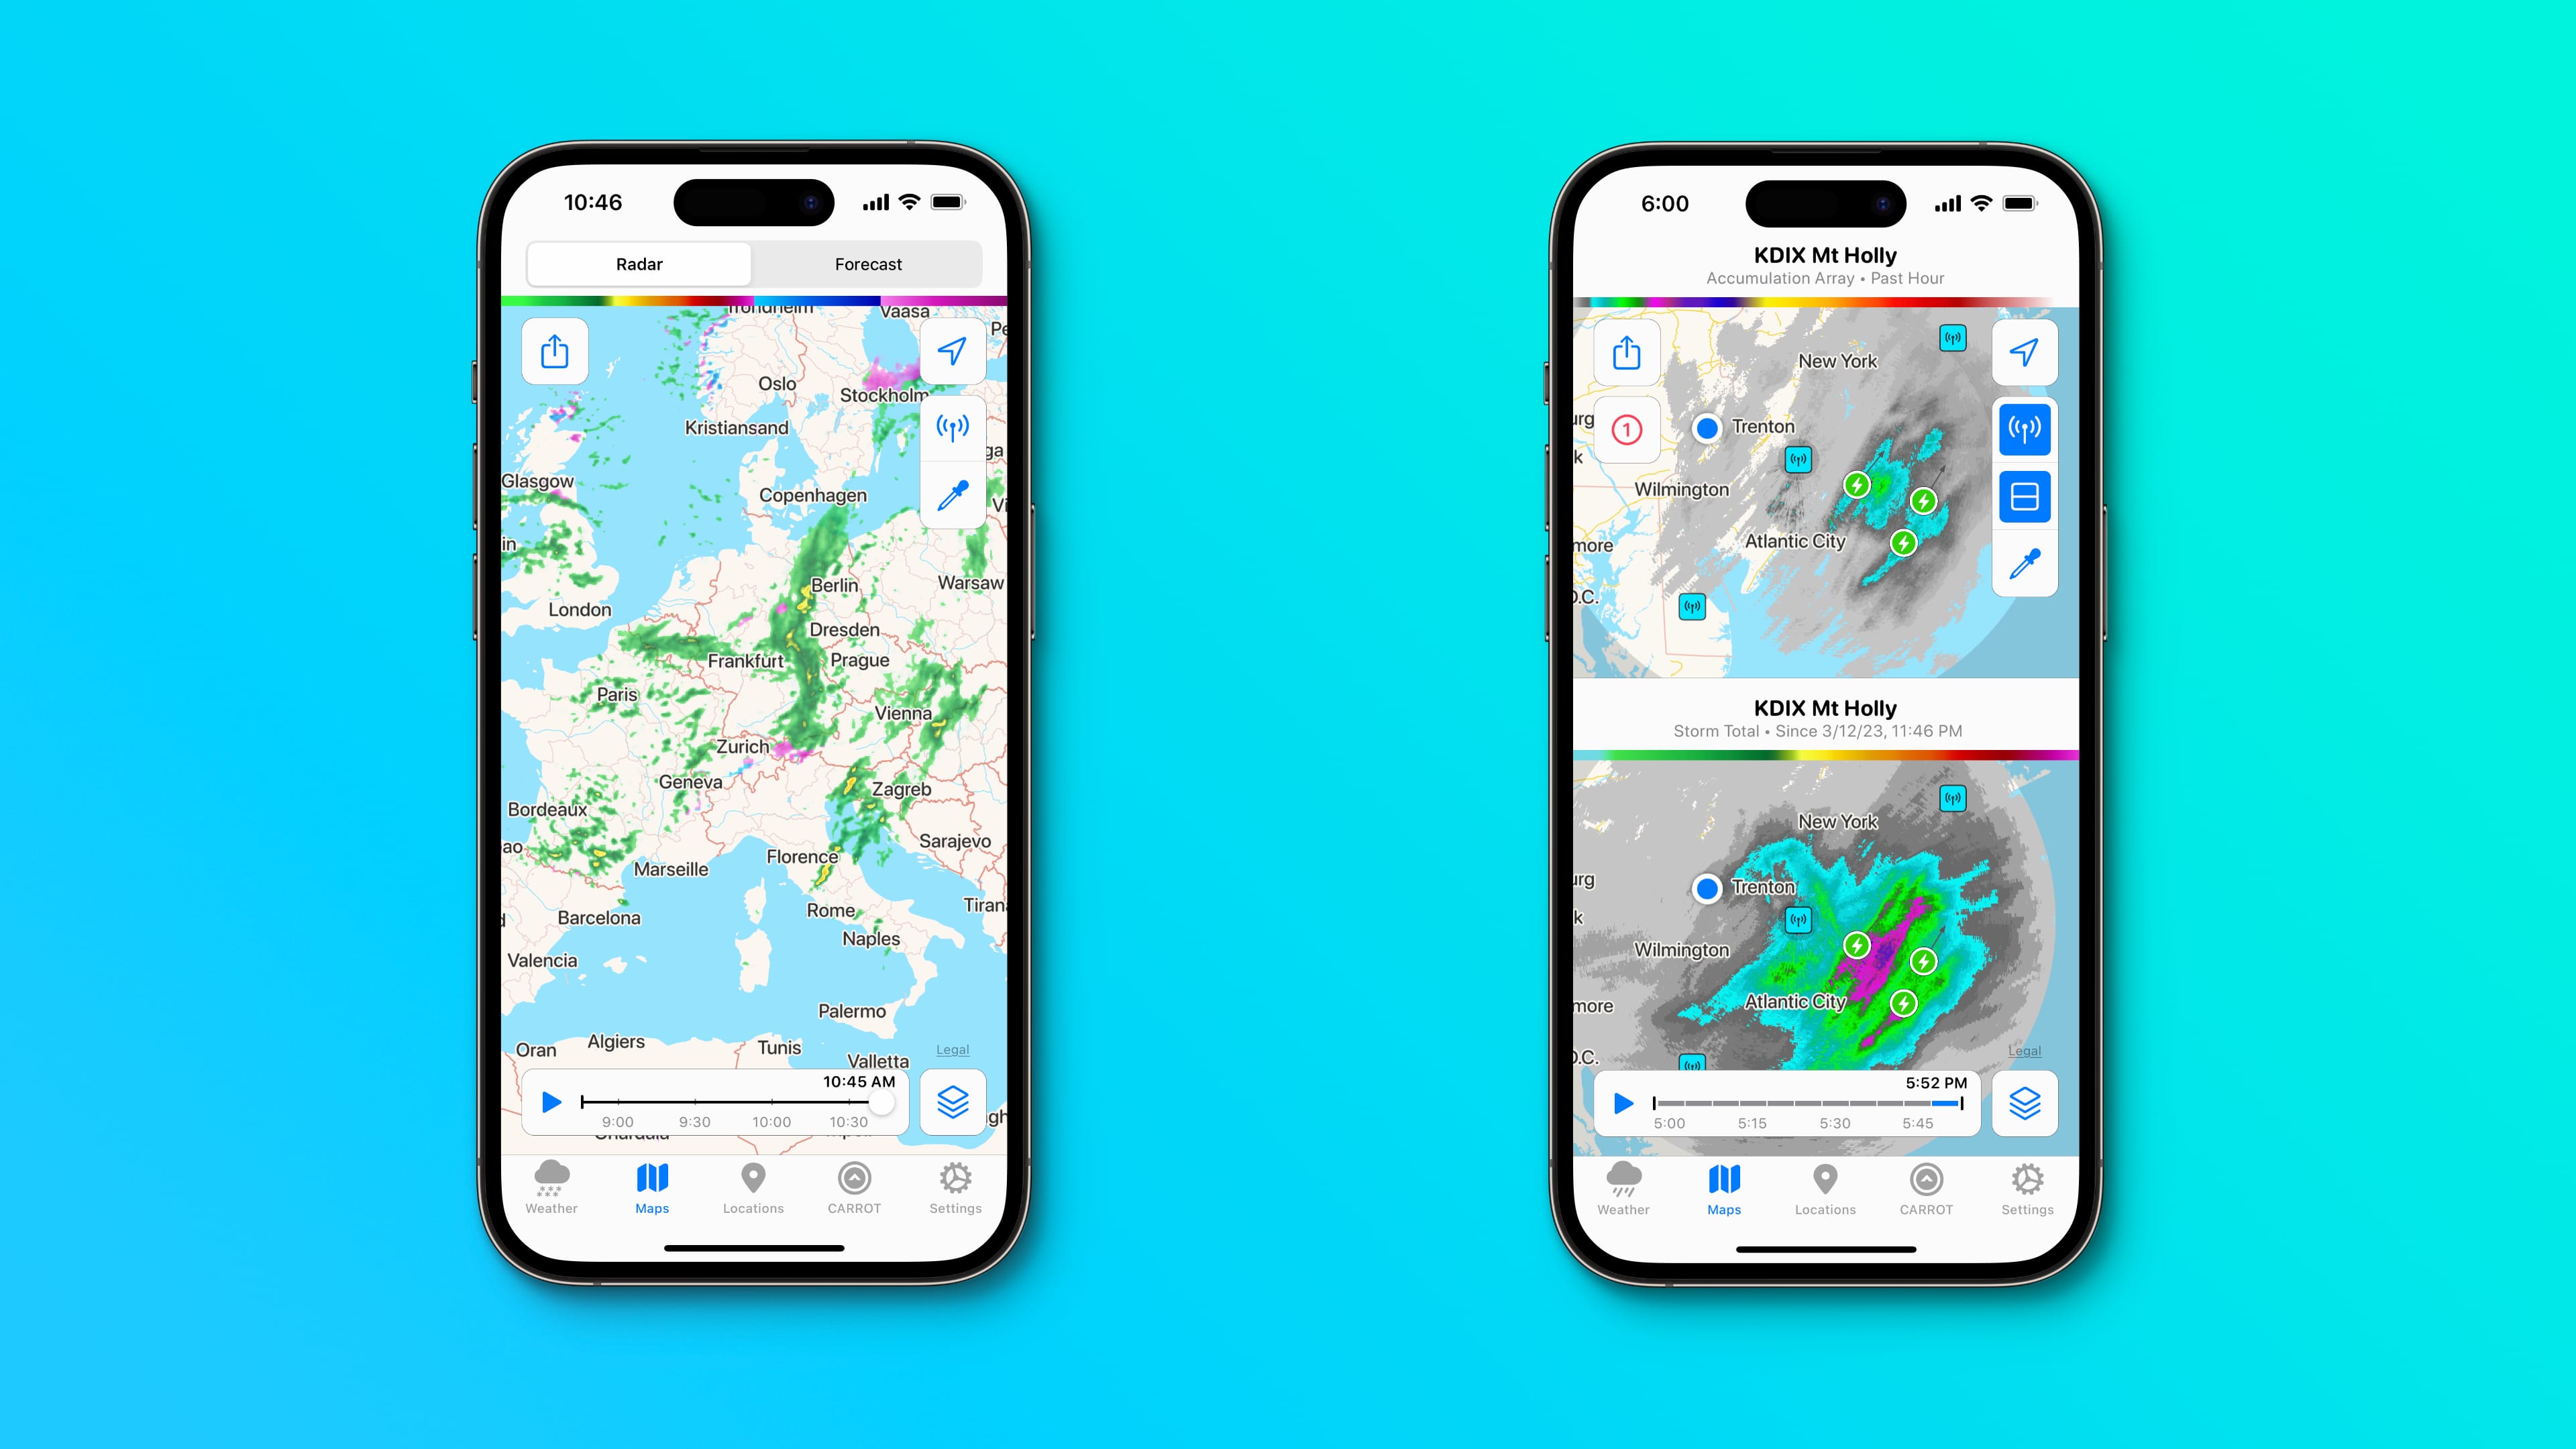 Radar maps and multi-location support in Carrot Weather for iPhone